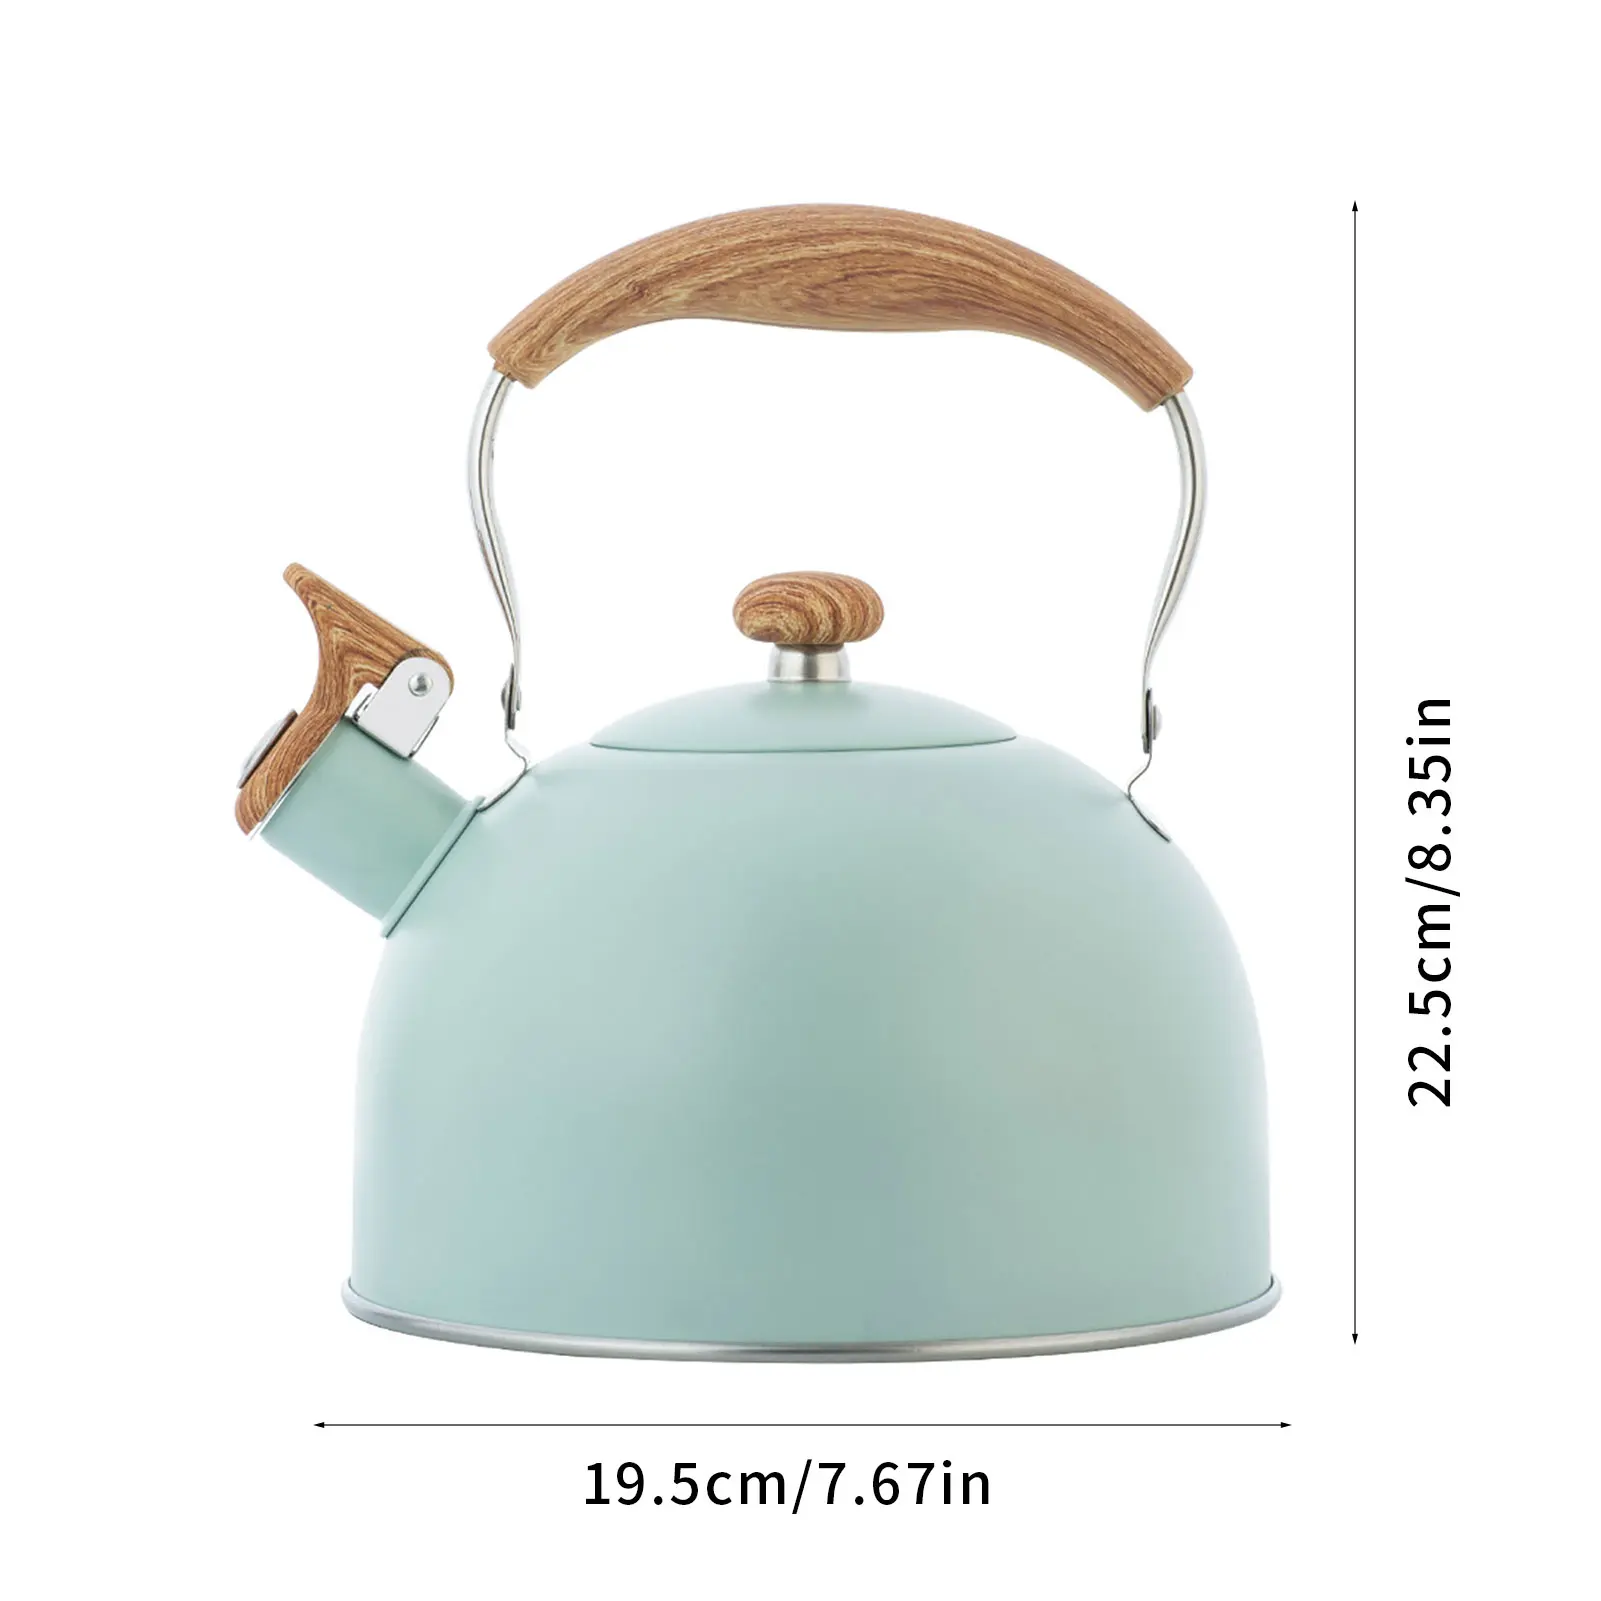 

Nordic Simple 2.5L Whistle Kettle Gas Induction Cooker Universal Coffee And Tea Kettle With Wood Grain Anti-scalding Handle